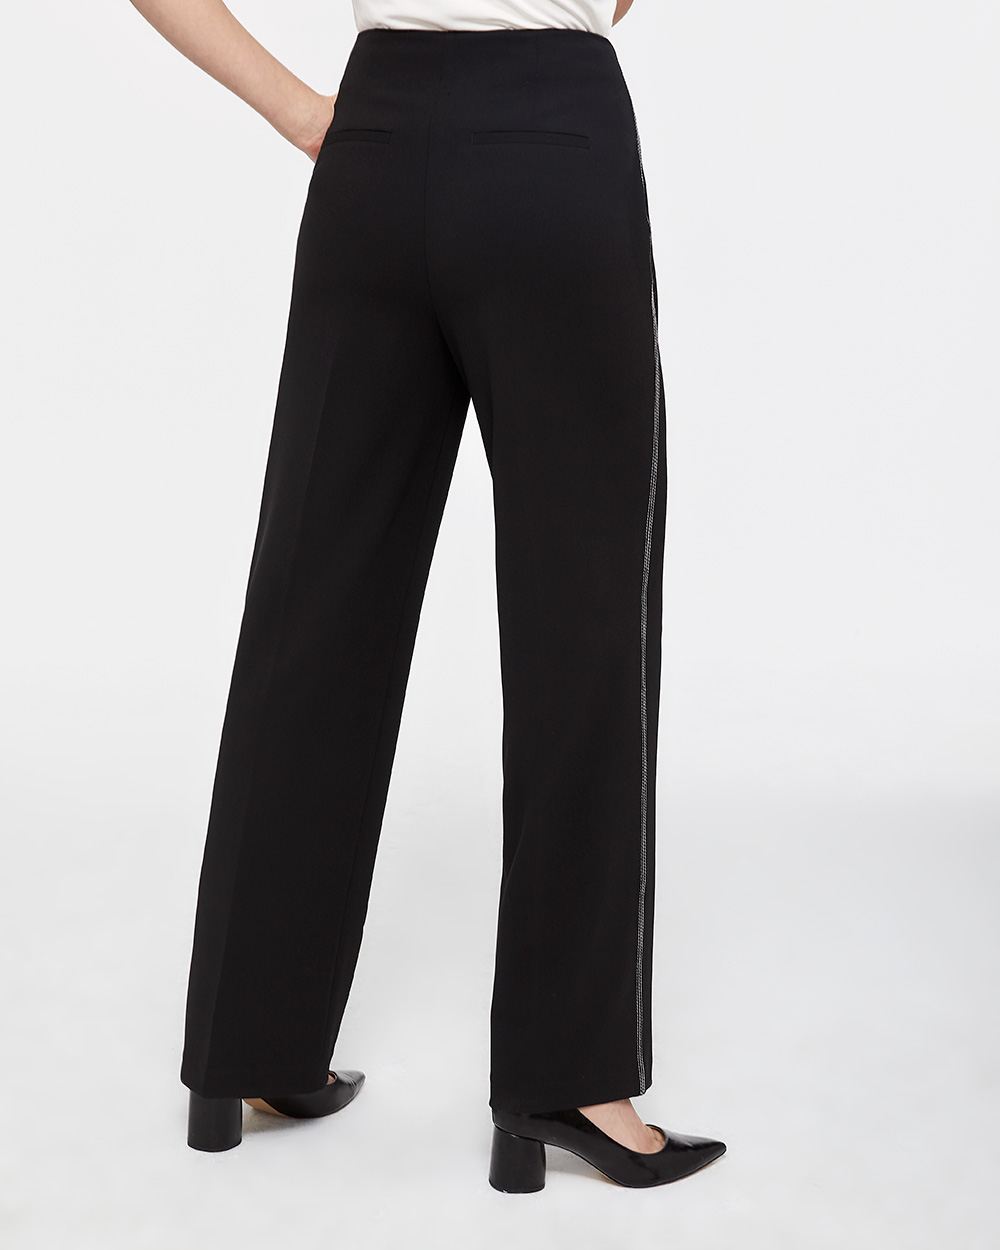 Wide Leg Pants with Contrasting Stitching | Regular | Reitmans